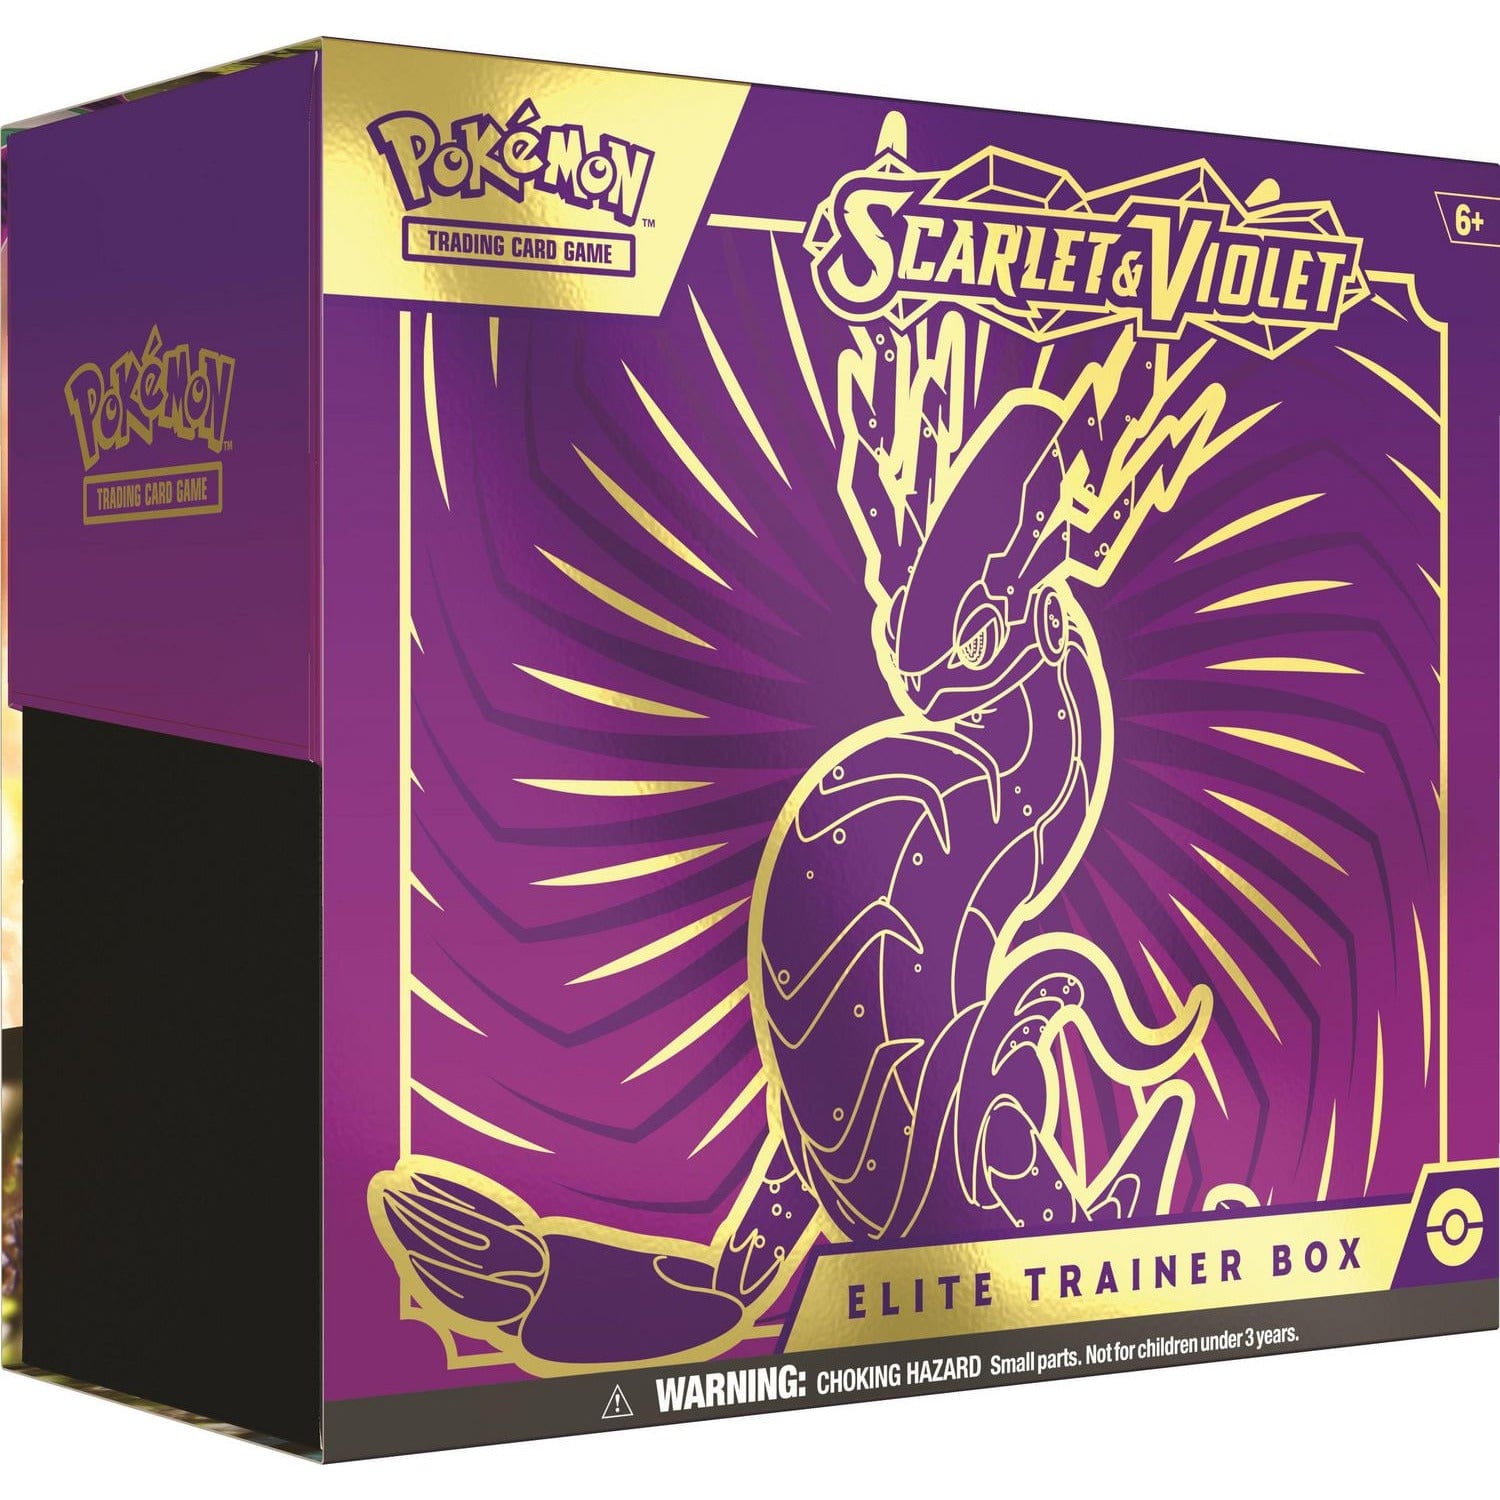 Pokémon - Trading Card Game: Scarlet & Violet Elite Trainer Box - Styles May Vary - Redshift7toys.com